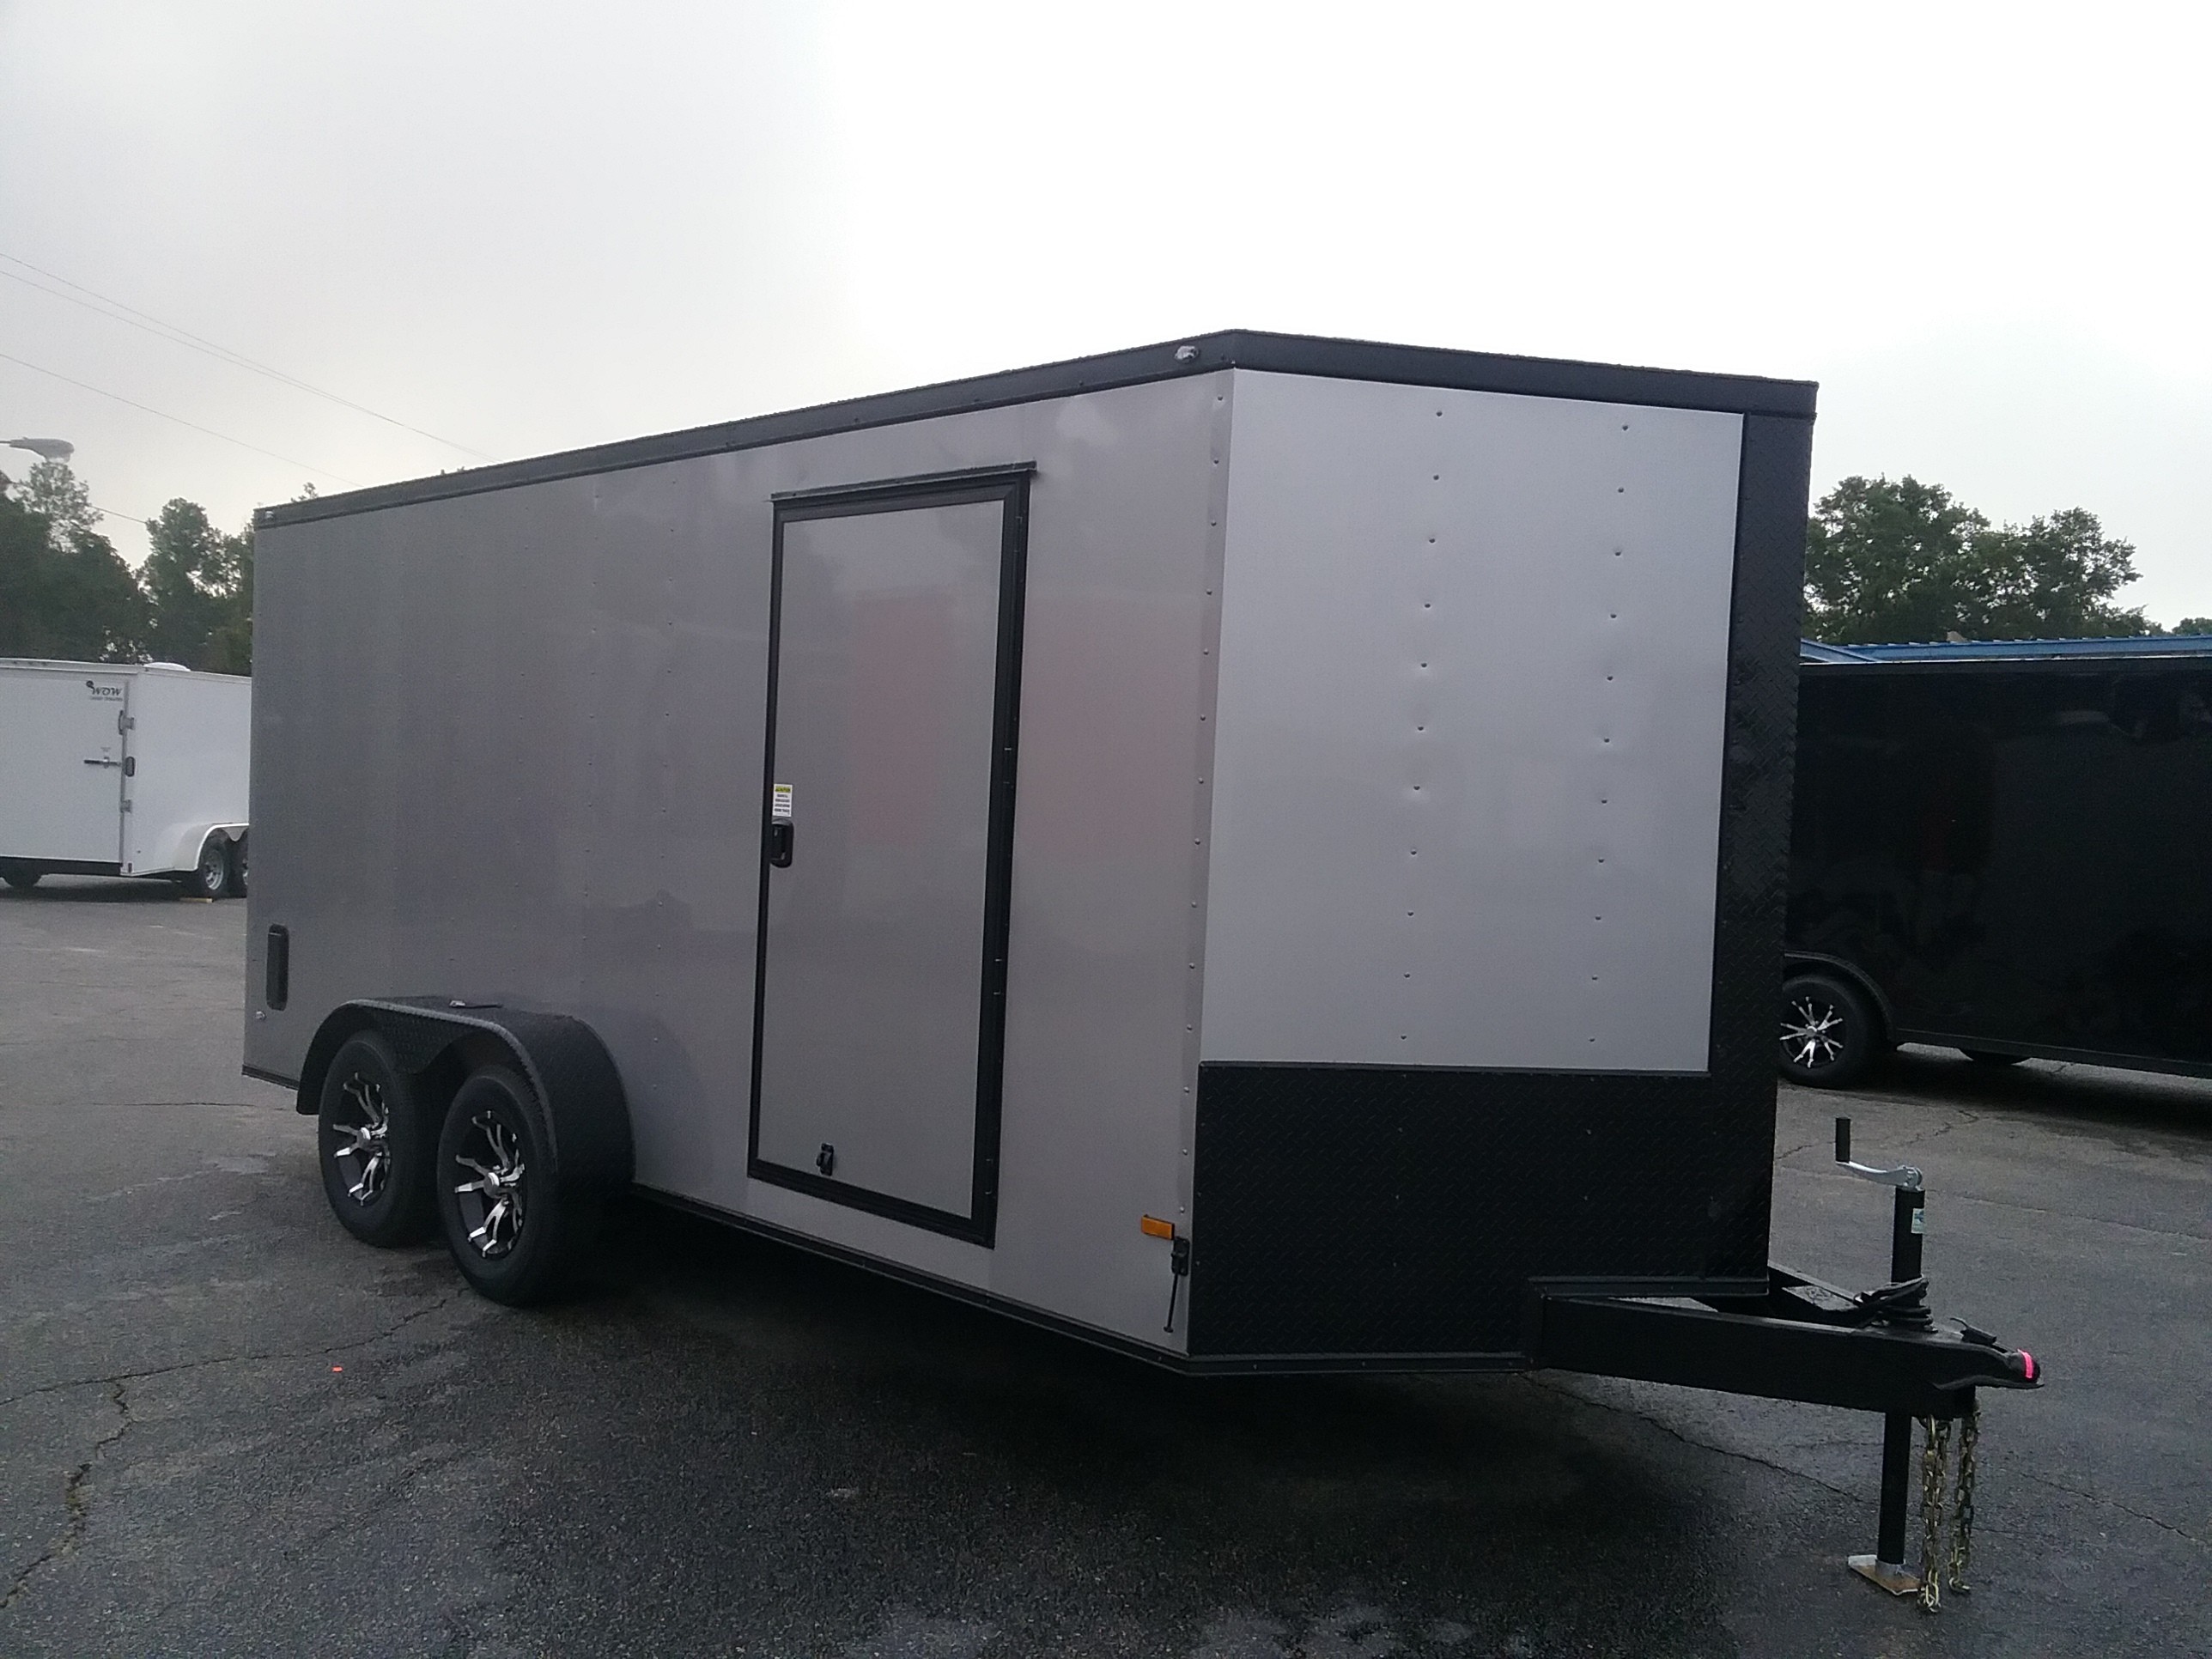 Buy & Sell New & Used Trailers Silver Blackout Edition at TrailerShopper